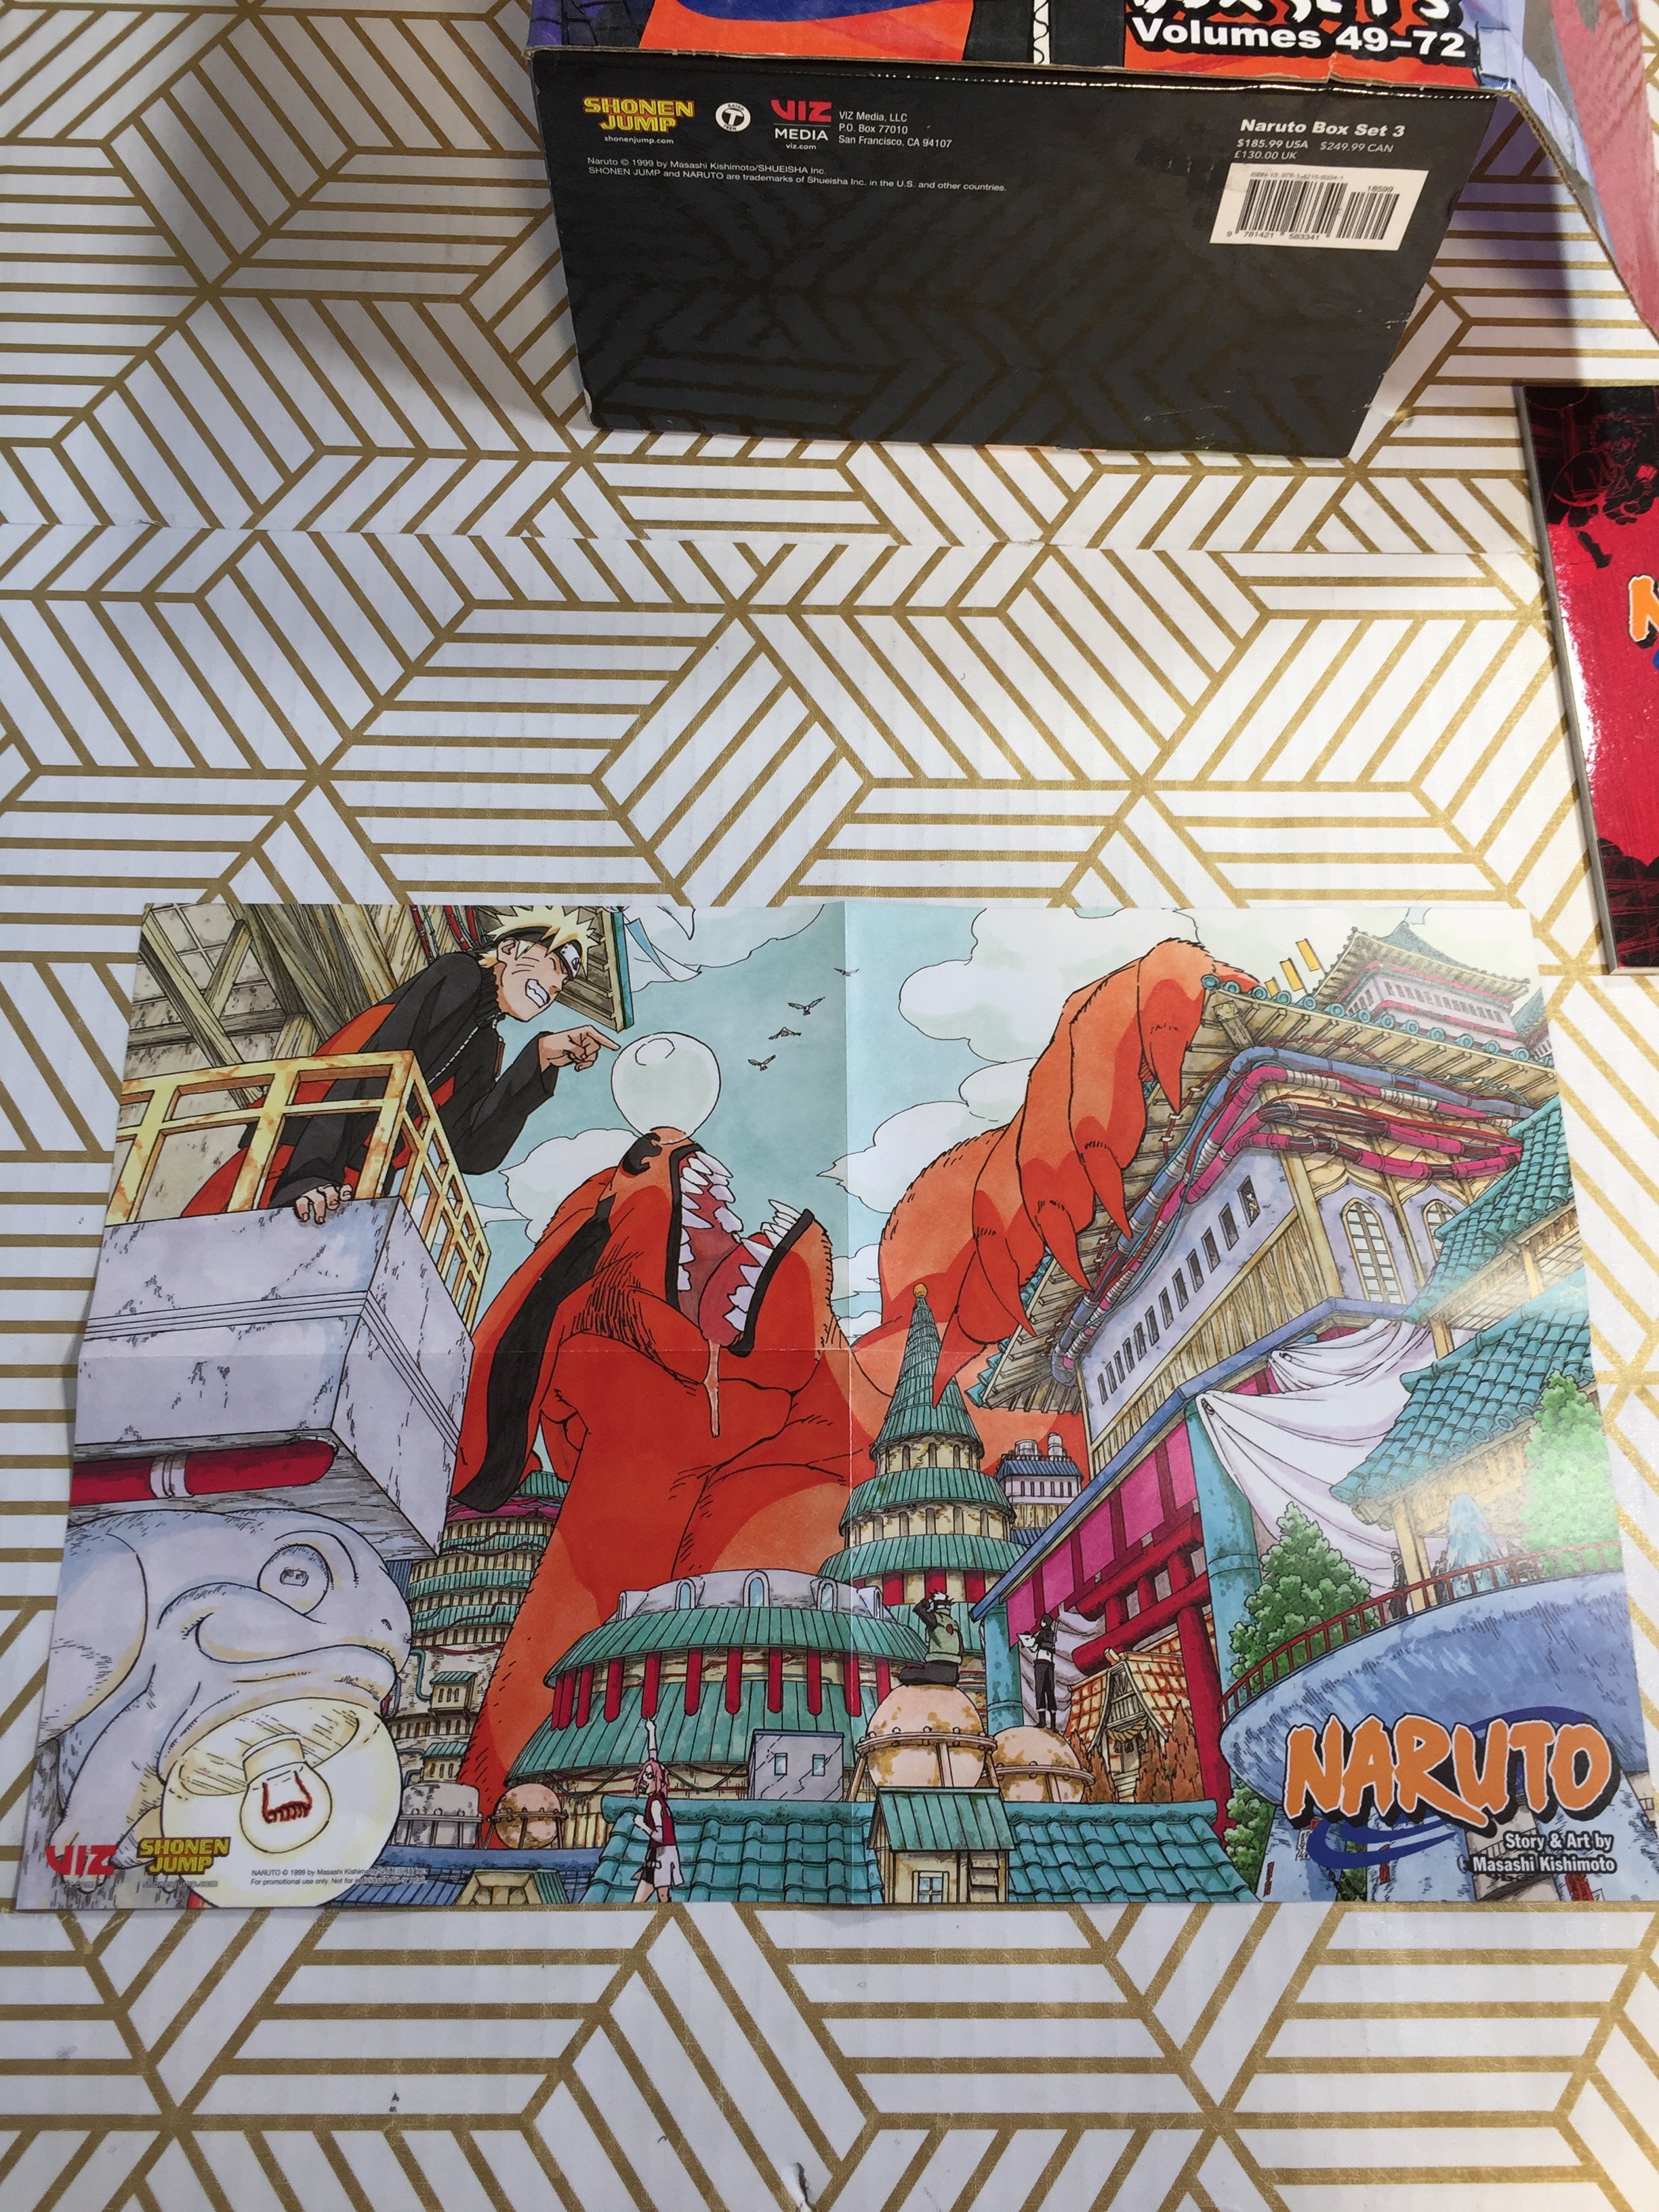 Naruto Box Set 3: Volumes 49-72 with Bonus Comic & Two-Sided Poster *EXCELLENT* (7763811533038)